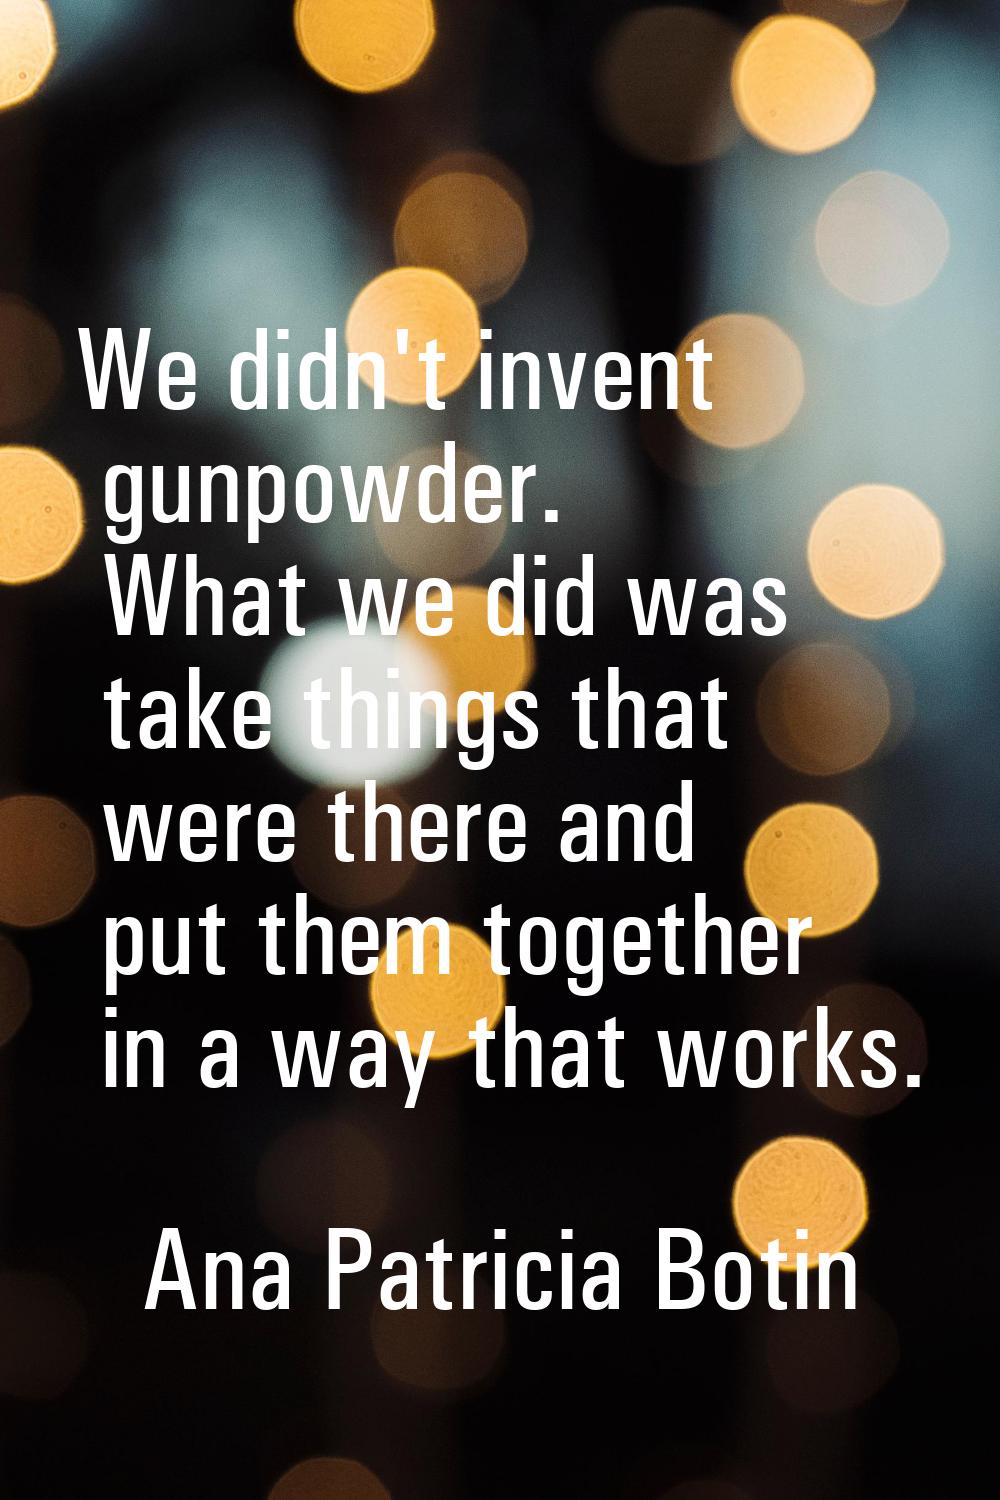 We didn't invent gunpowder. What we did was take things that were there and put them together in a 